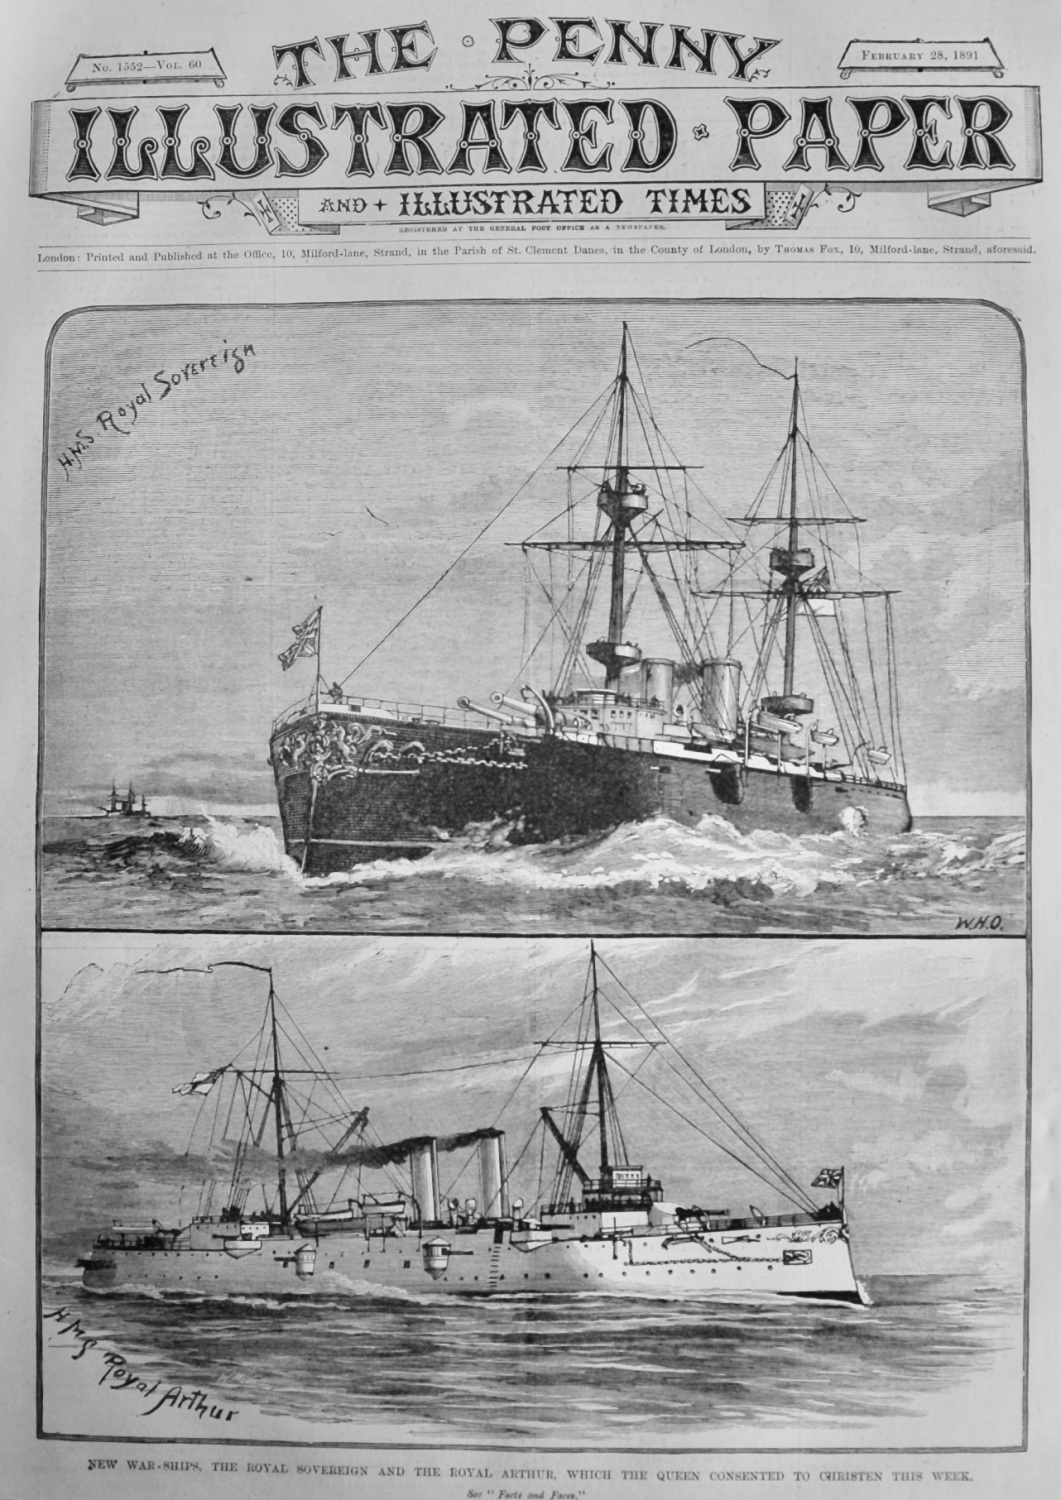 New War-Ships. the Royal Sovereign and the Royal Arthur, which the Queen co